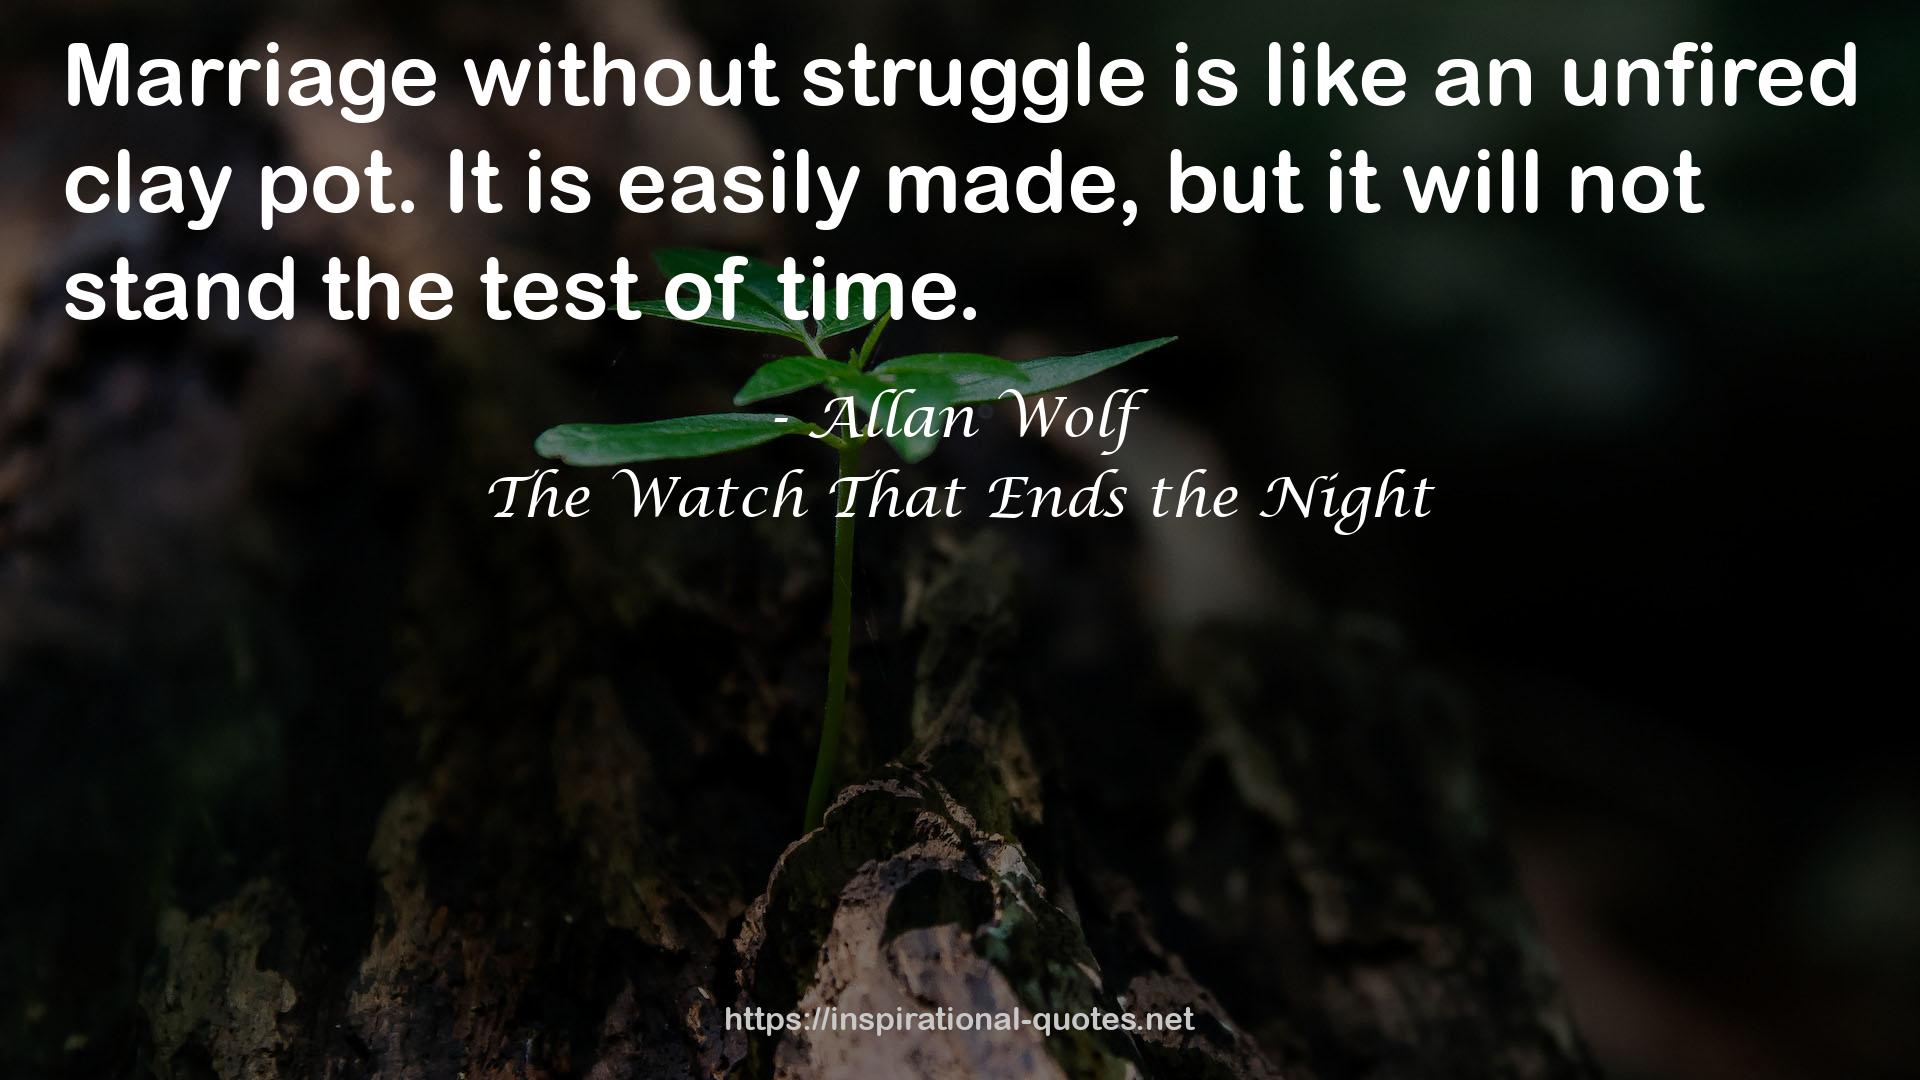 The Watch That Ends the Night QUOTES